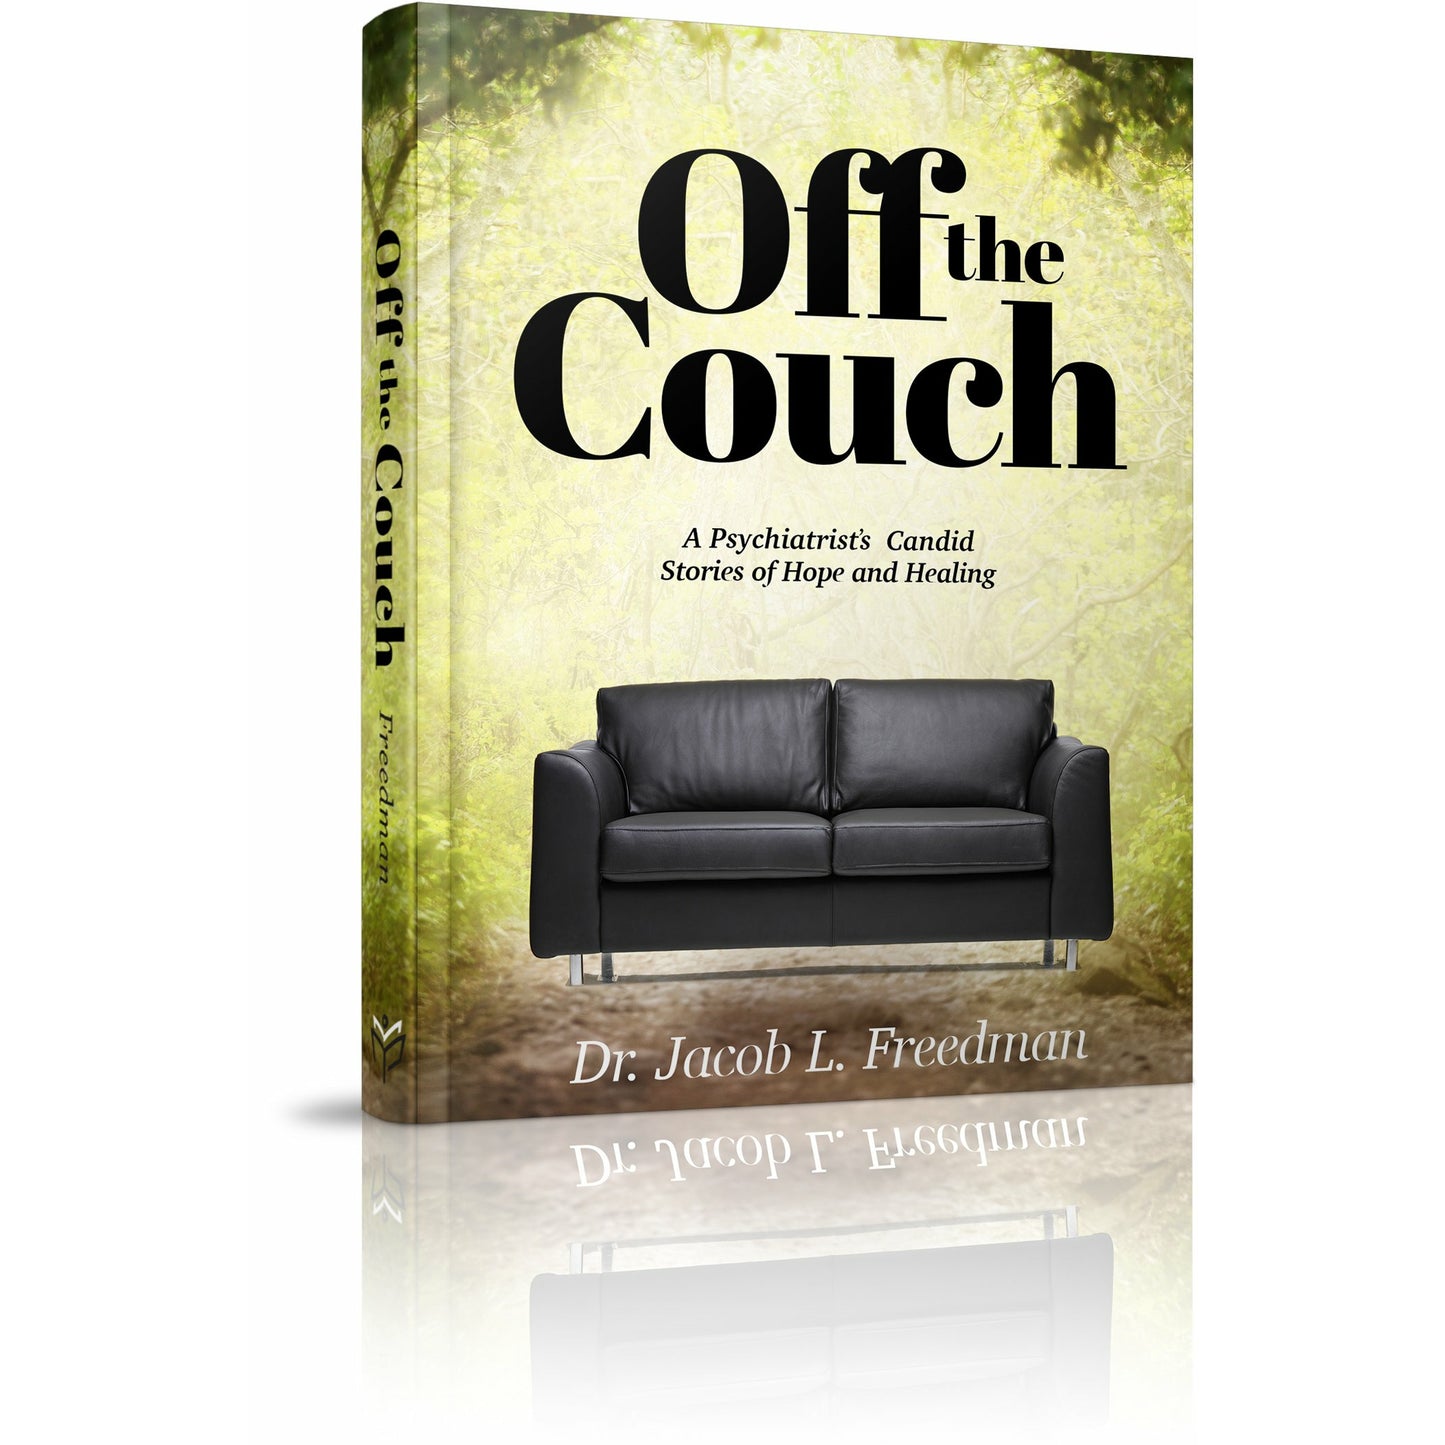 Off the Couch